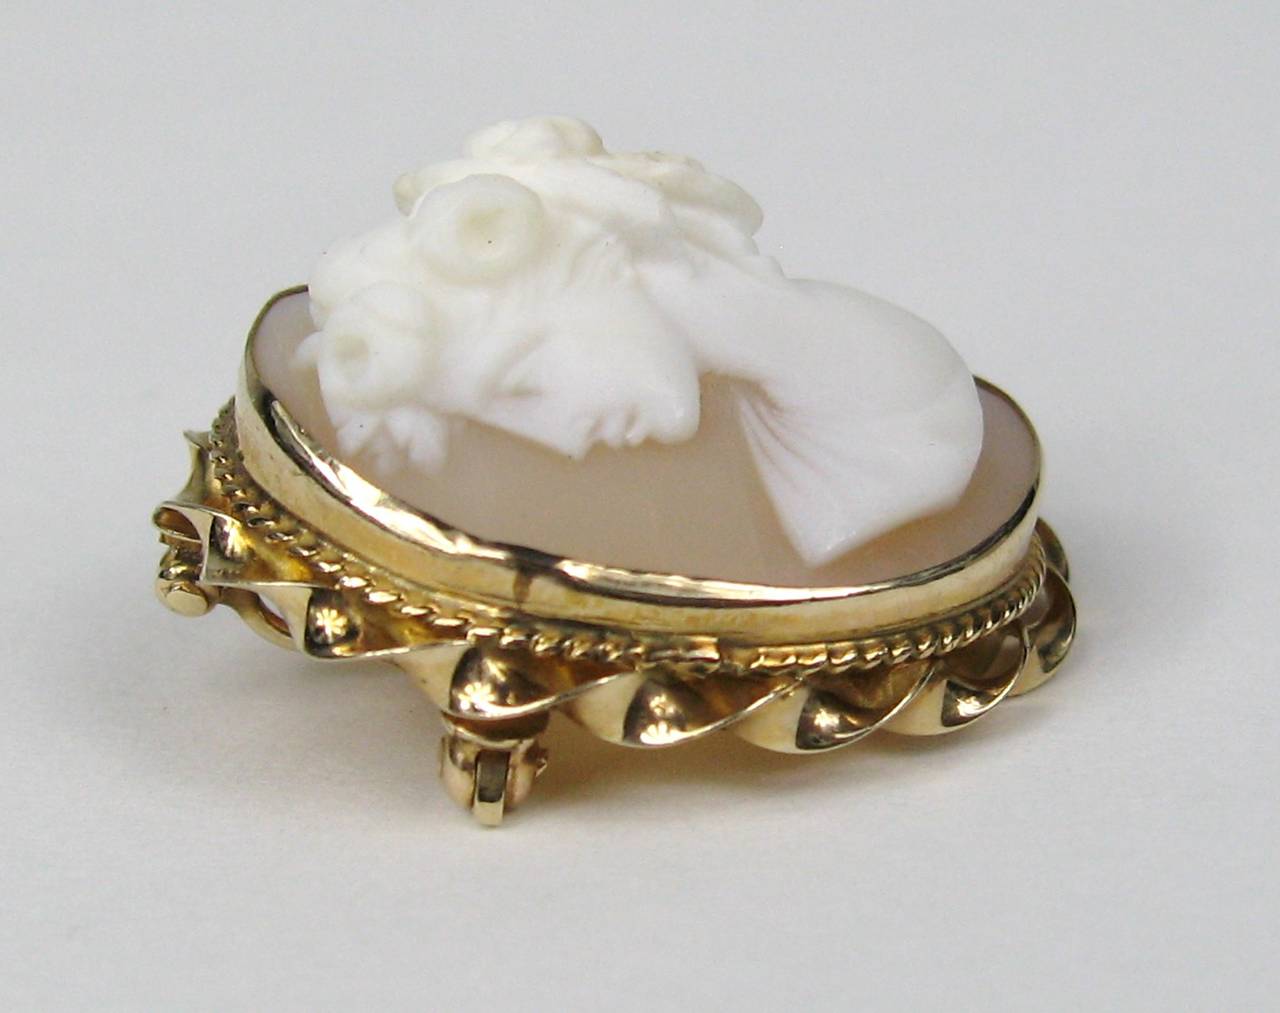 Women's Highly Detailed Gold Cameo Shell Pendant Brooch